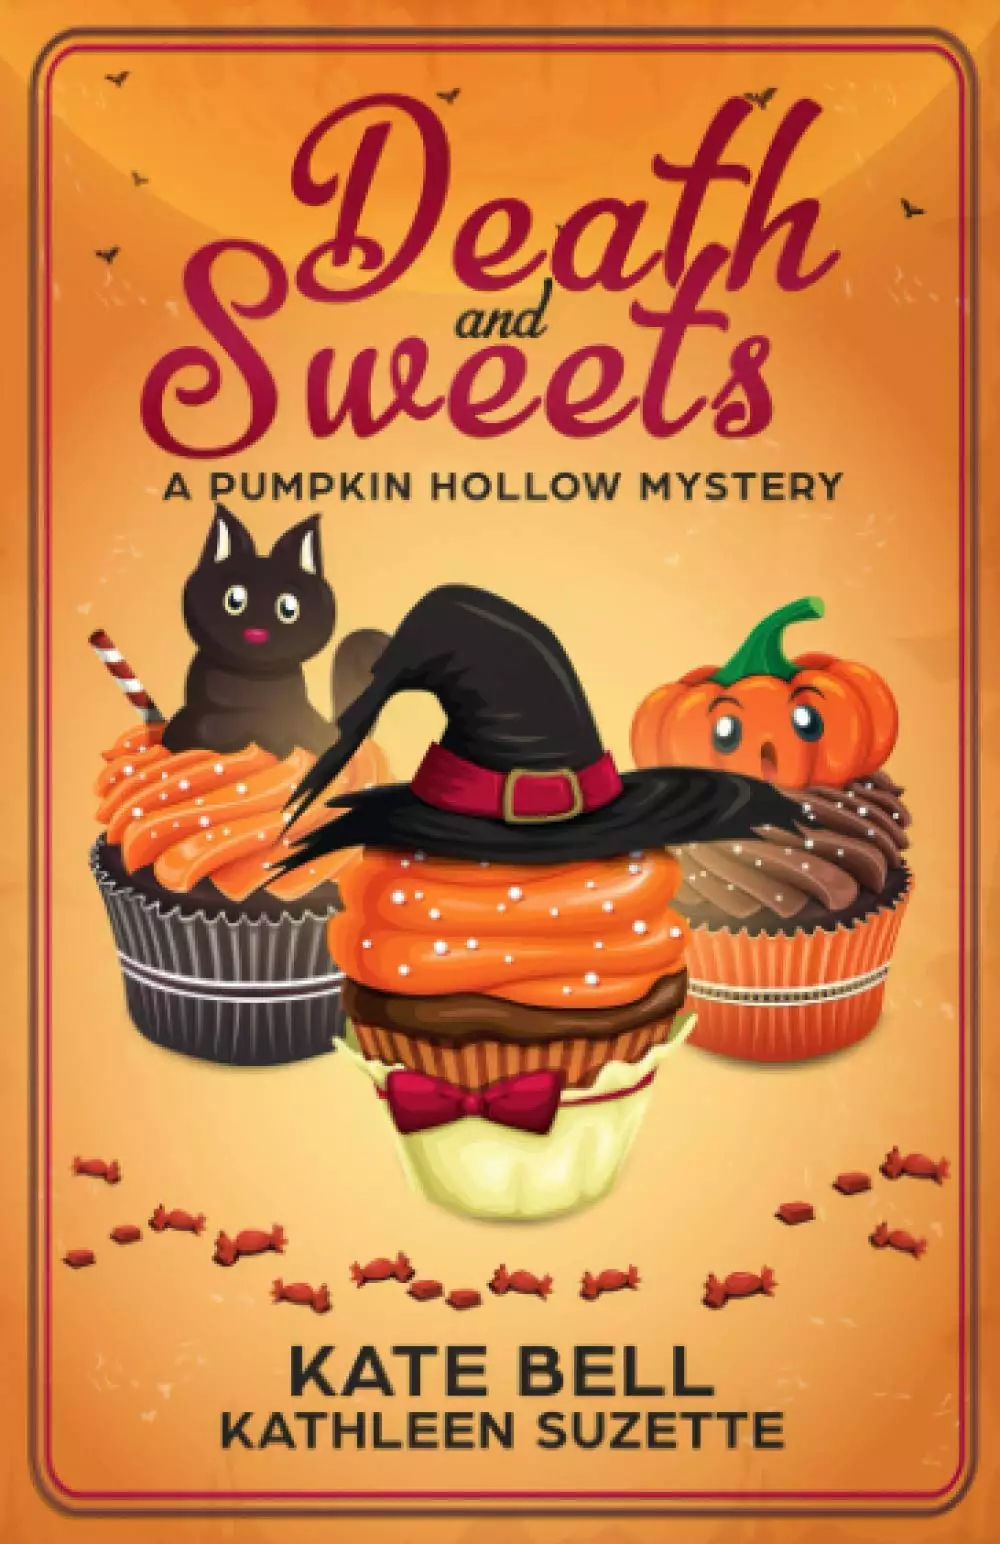 Death and Sweets: A Pumpkin Hollow Mystery, book 4